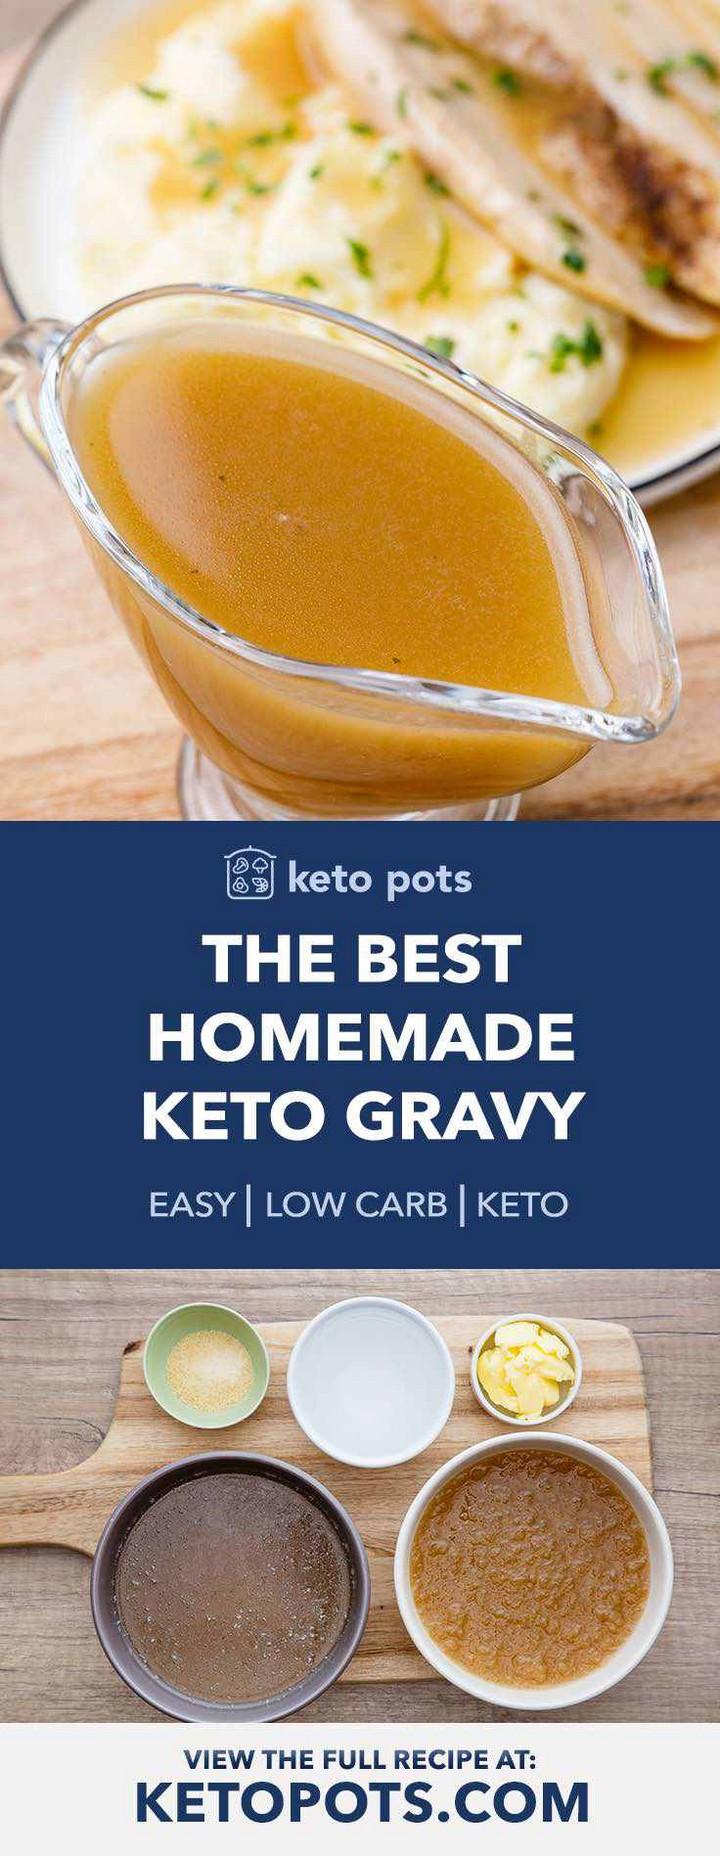 Quick Easy Keto Gravy That Works for Any Meal